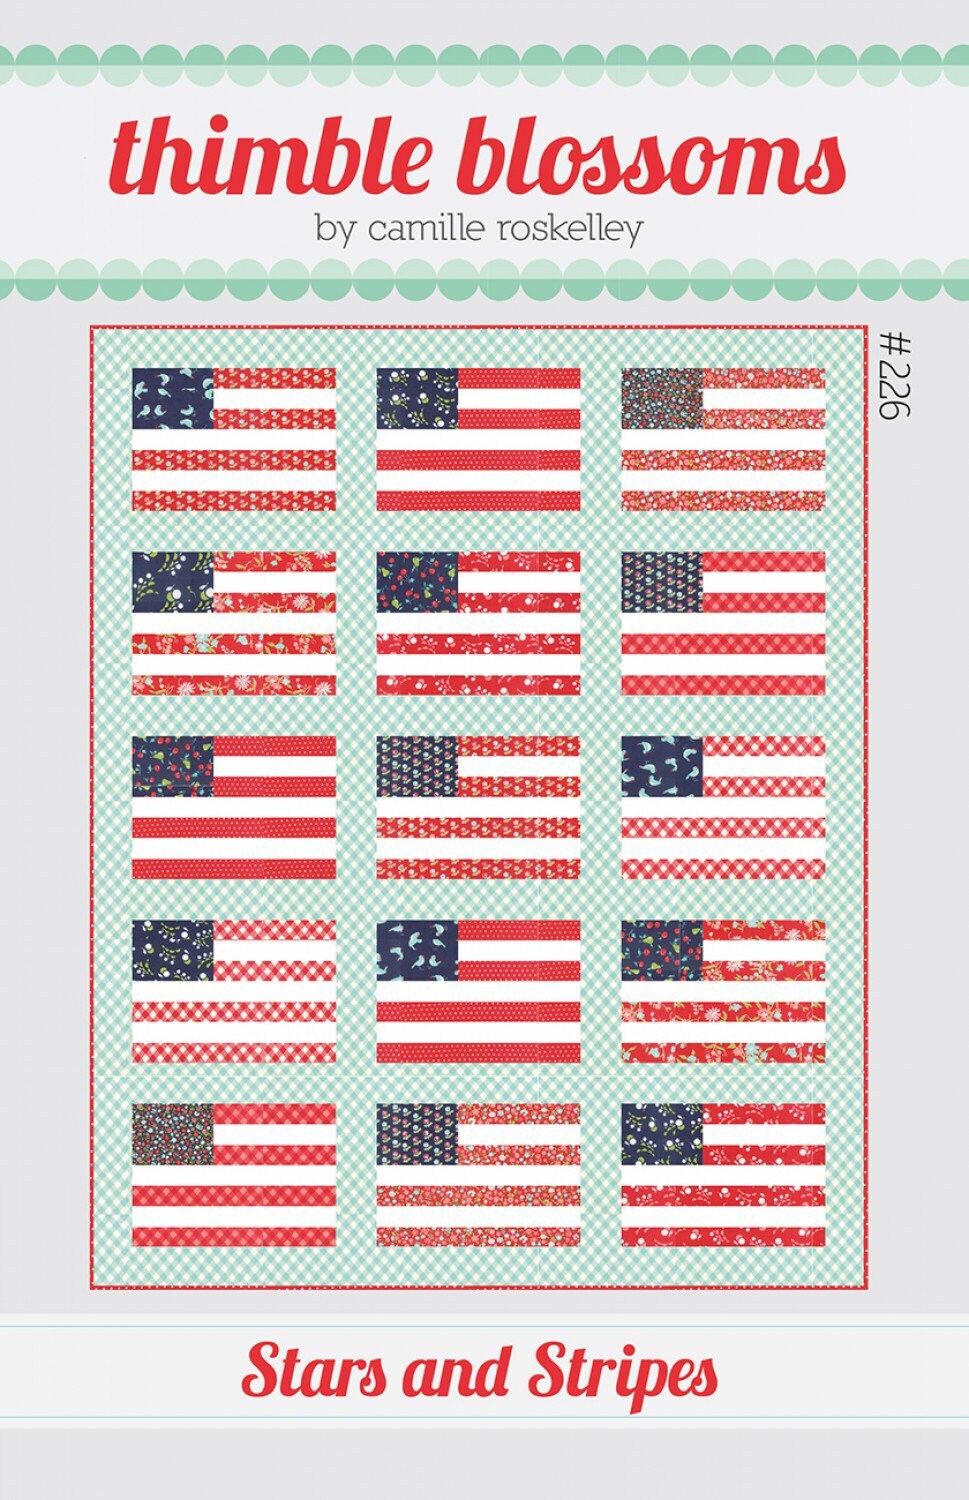 Stars and Stripes Quilt Pattern - Thimble Blossoms - Camille Roskelley - Fat Quarter Friendly